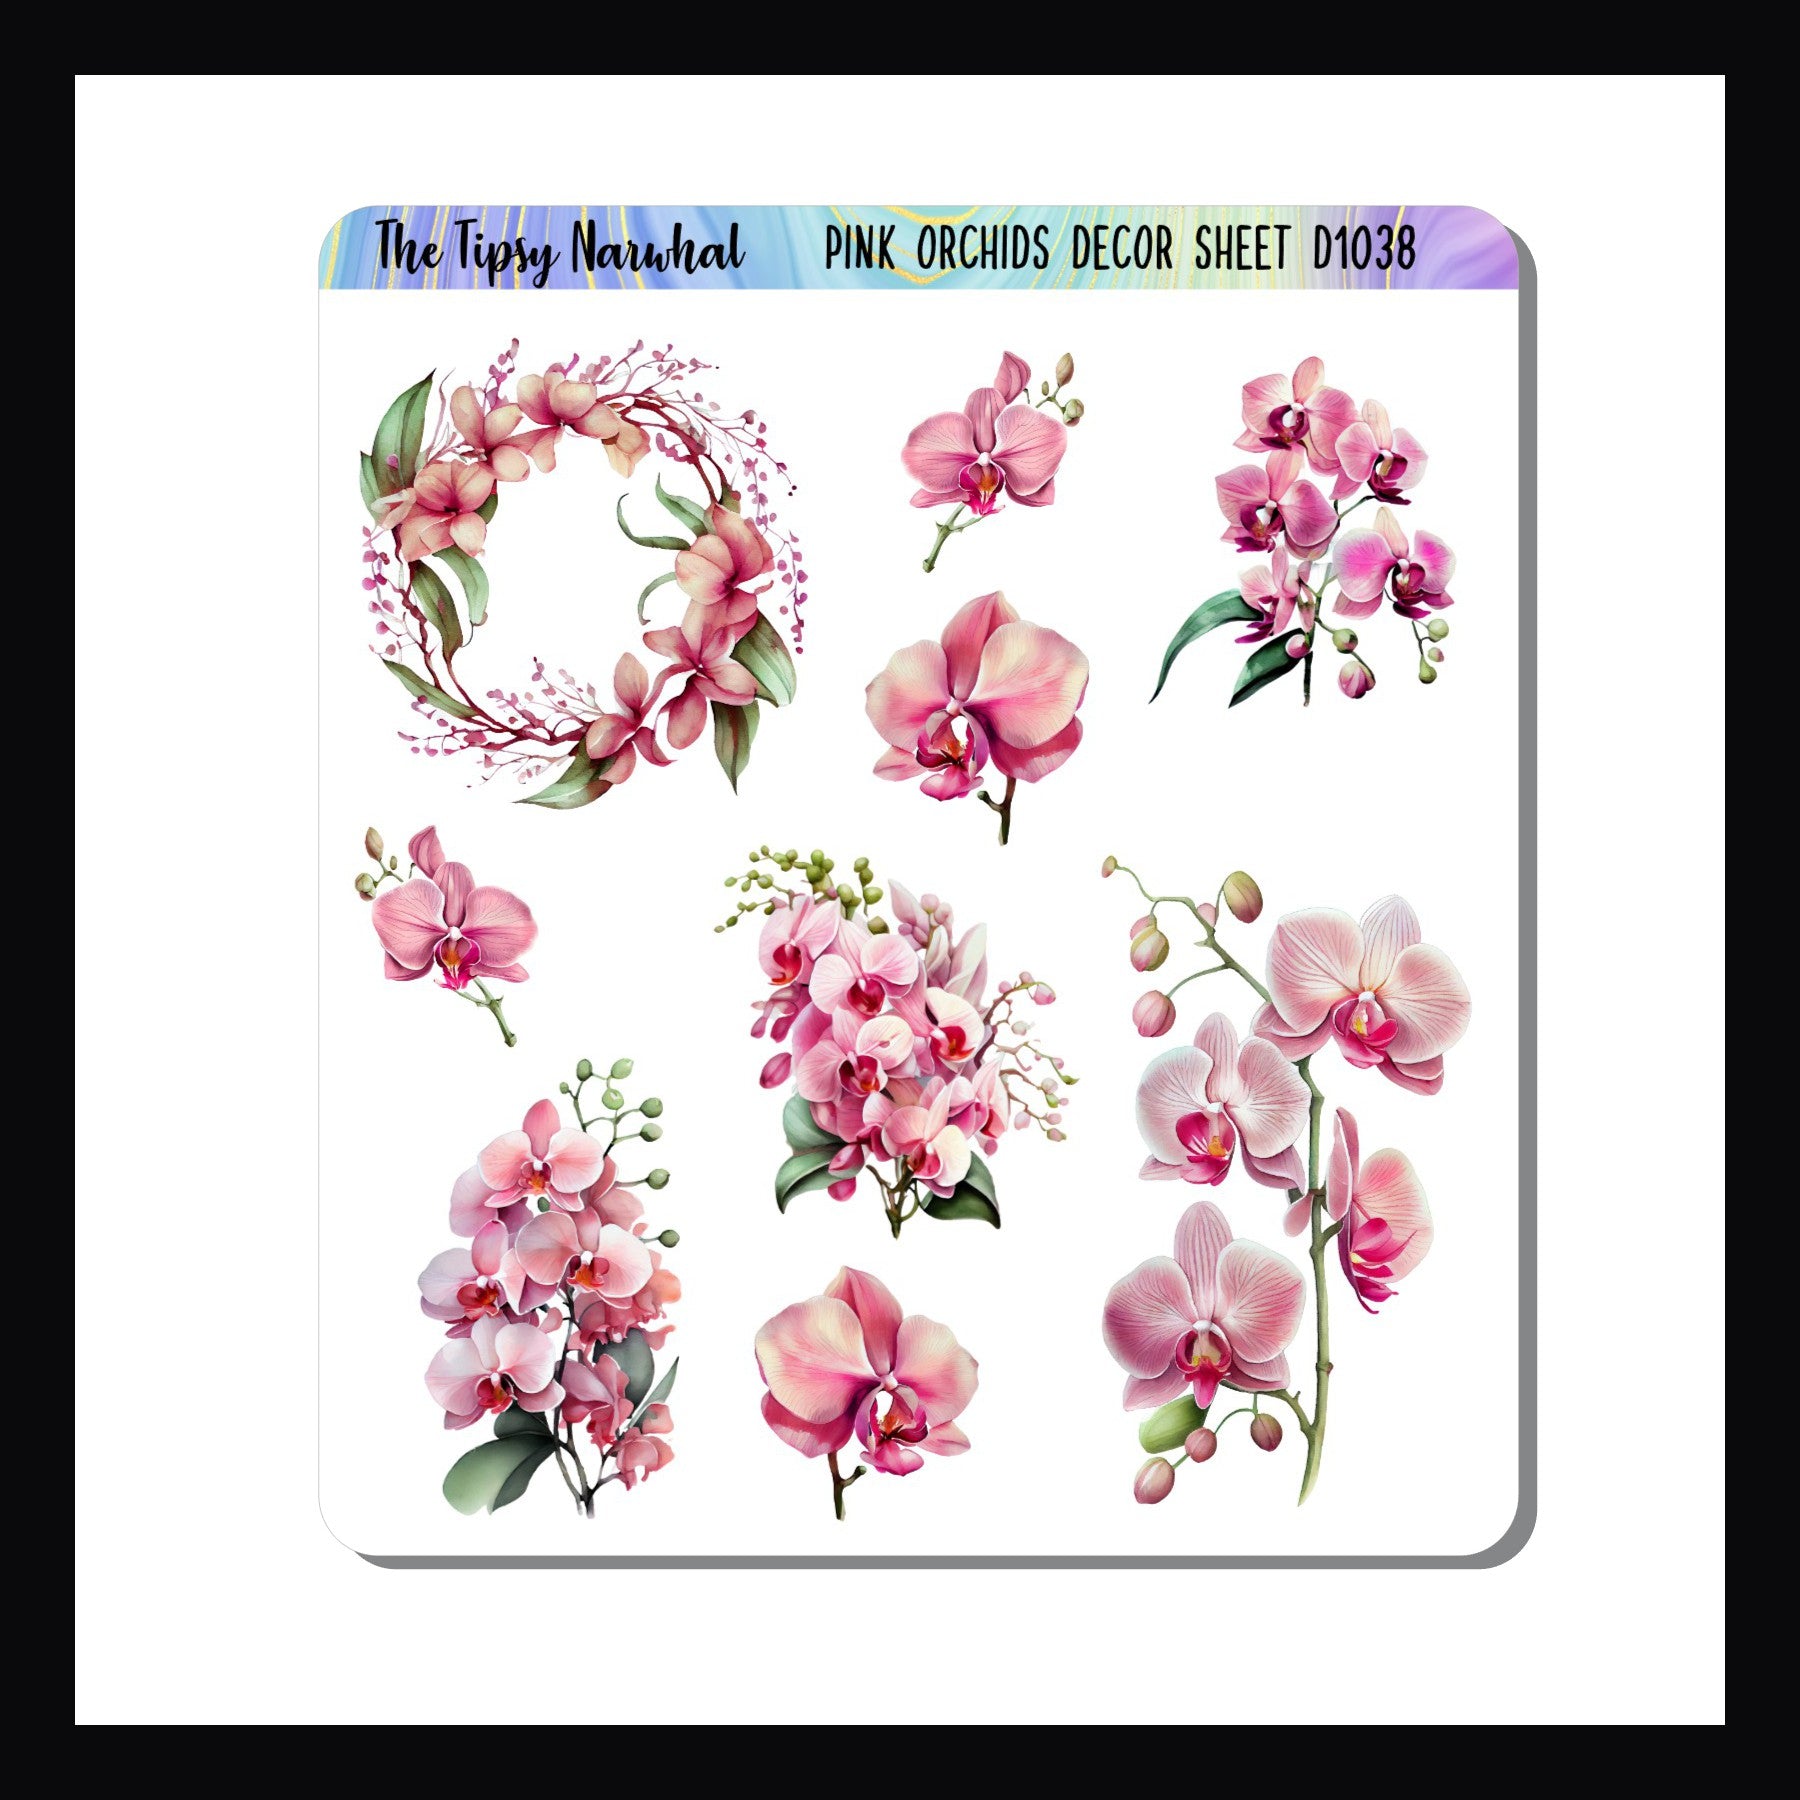 The Digital Pink Orchids Decor Sheet is the digital/printable version of the Pink Orchids Decor Sheet.  It features 9 stickers of various sizes depicting various pink orchid blooms.